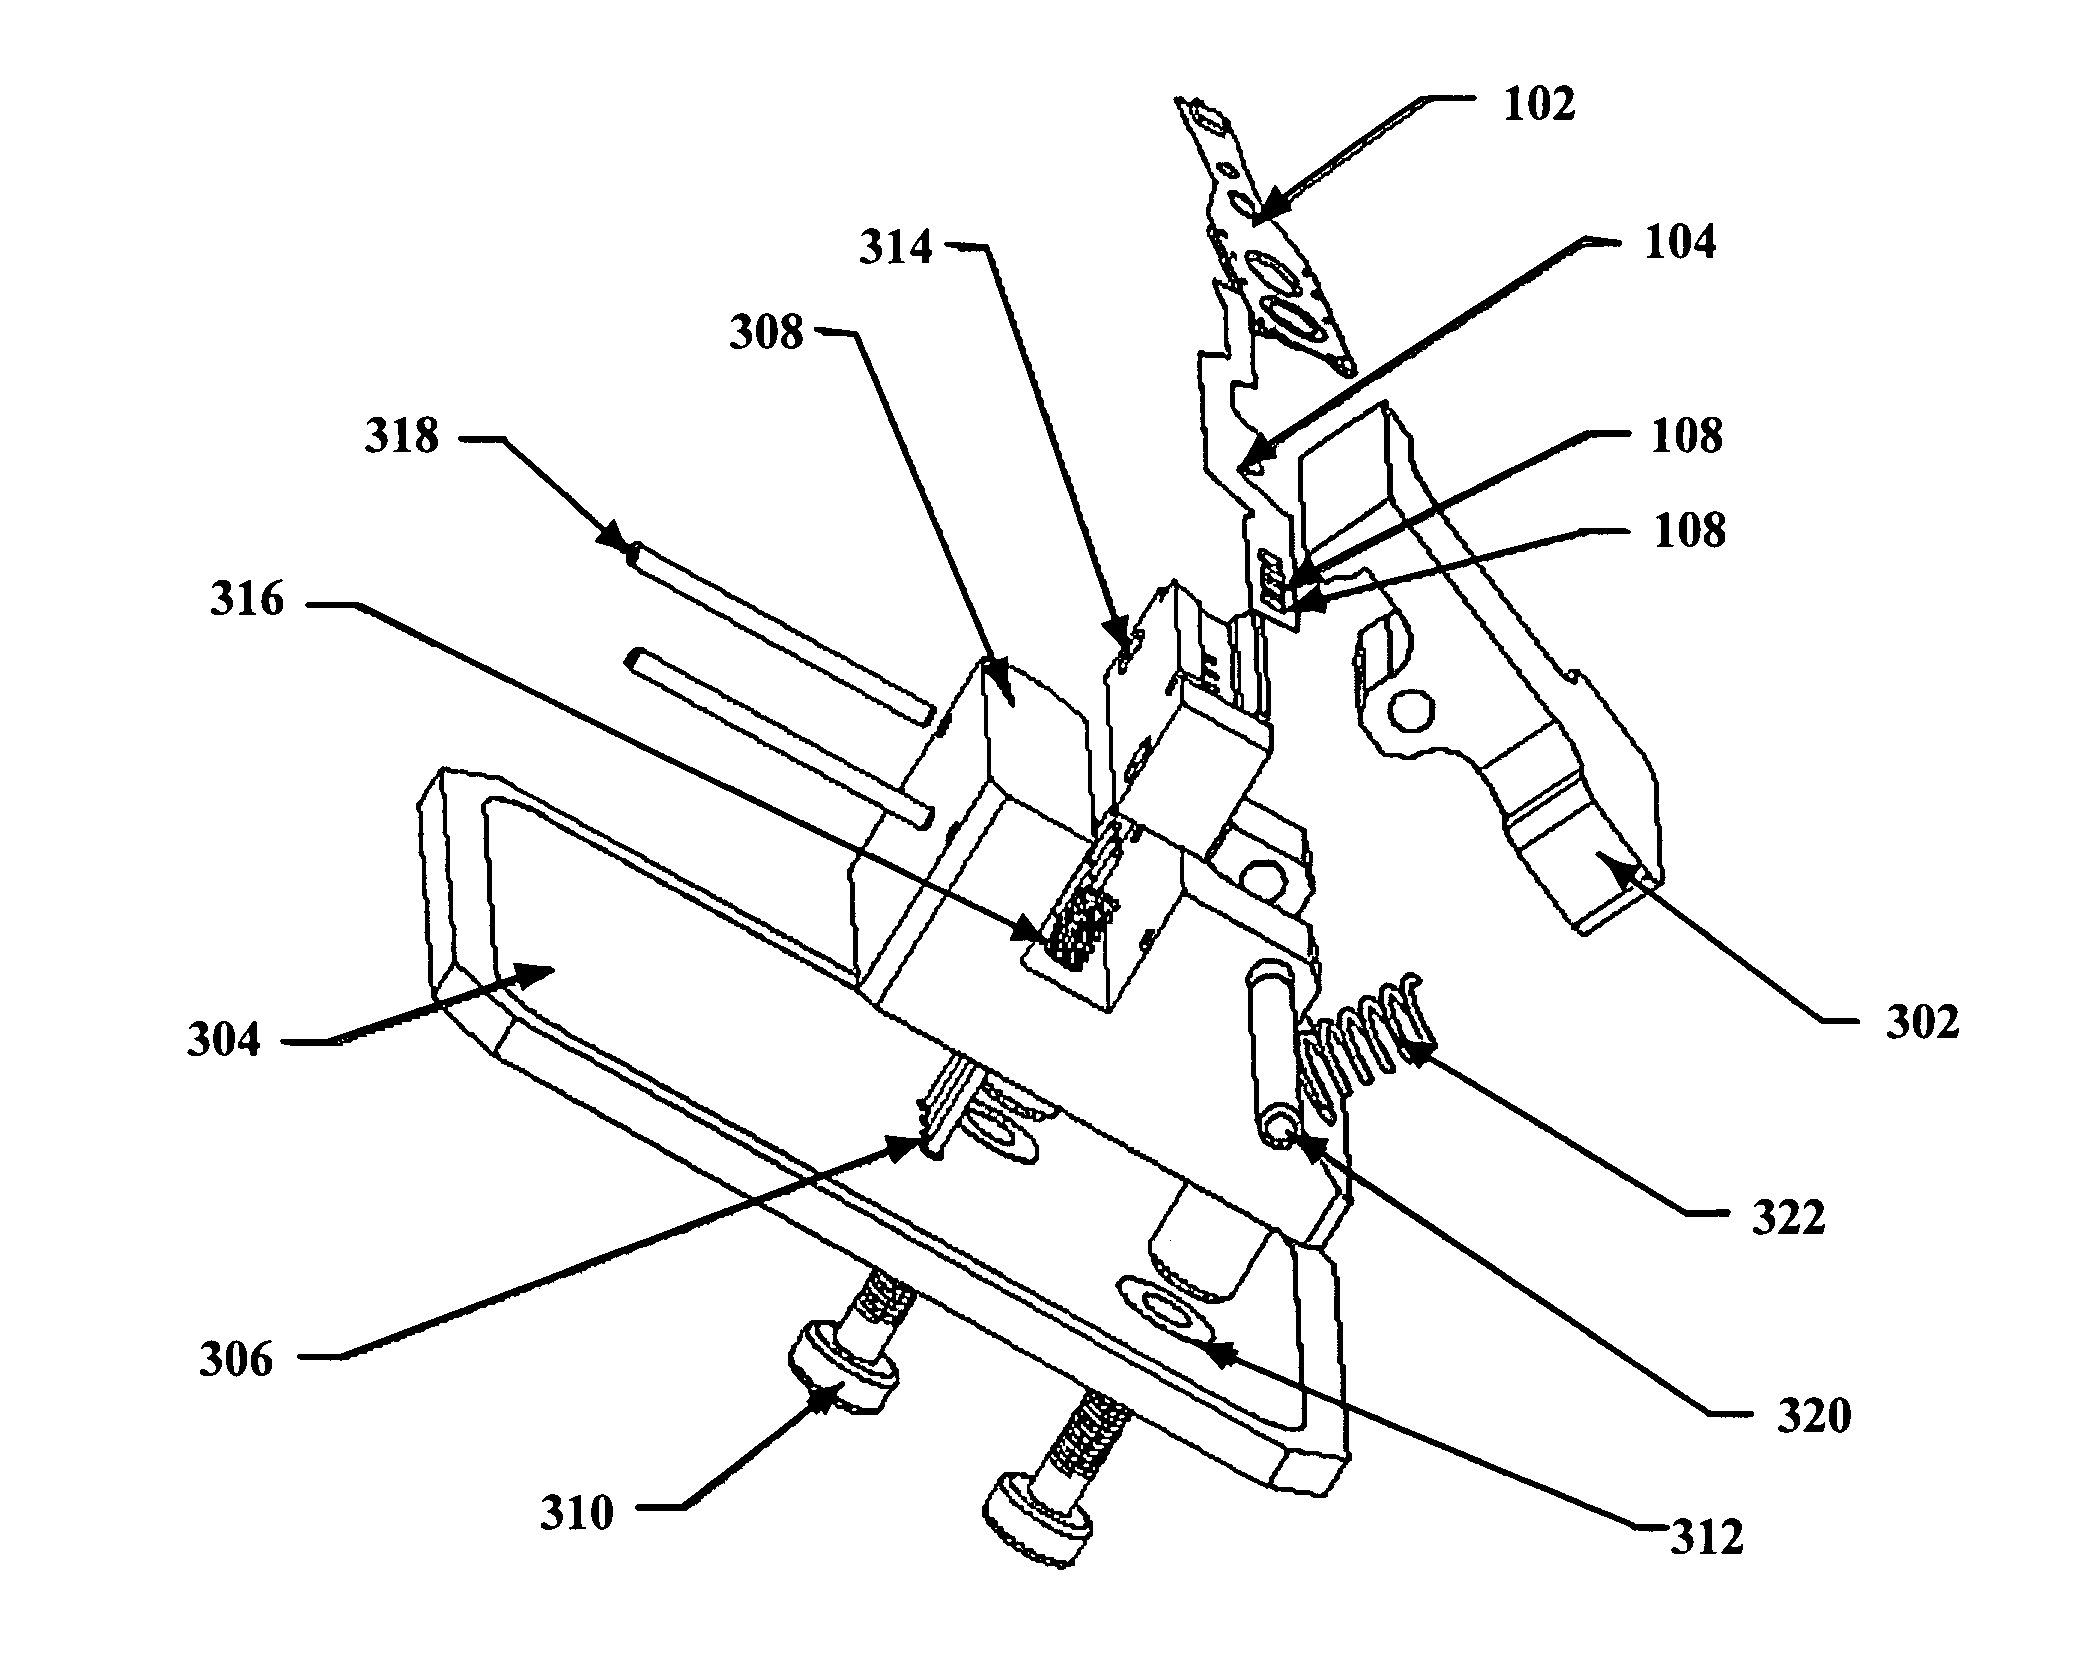 "2-step contact" clamping fixture for the flexible print circuit on a head gimbal assembly